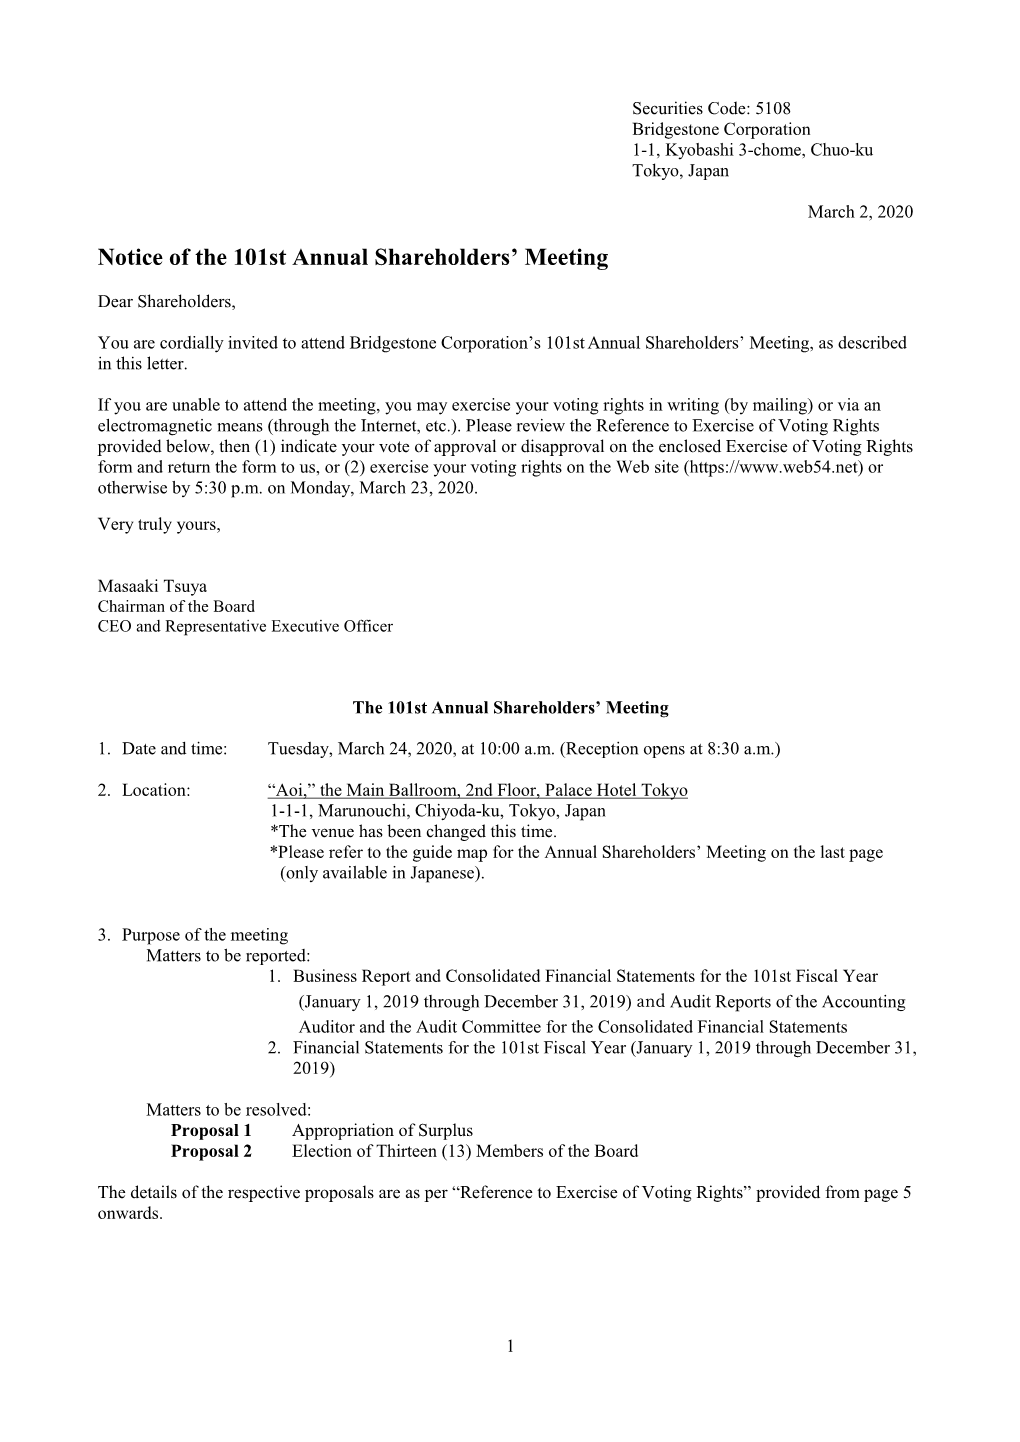 Notice of the 101St Annual Shareholders' Meeting